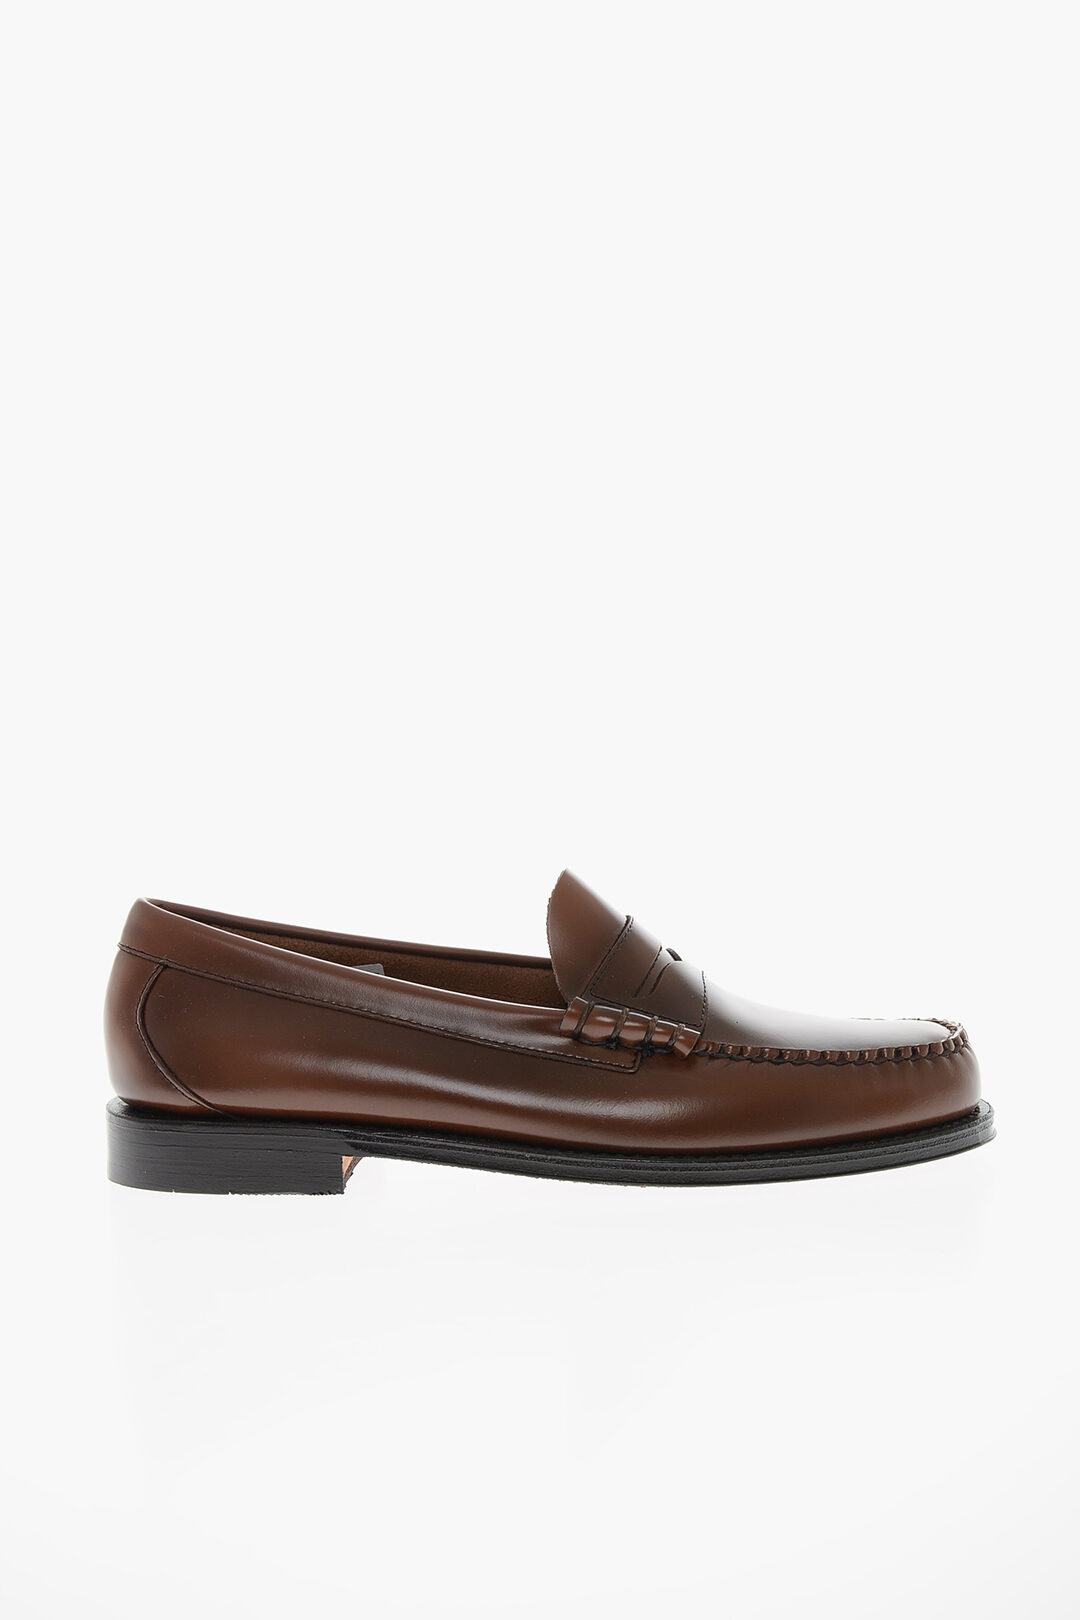 Weejuns Leather Penny Loafers men - Glamood Outlet